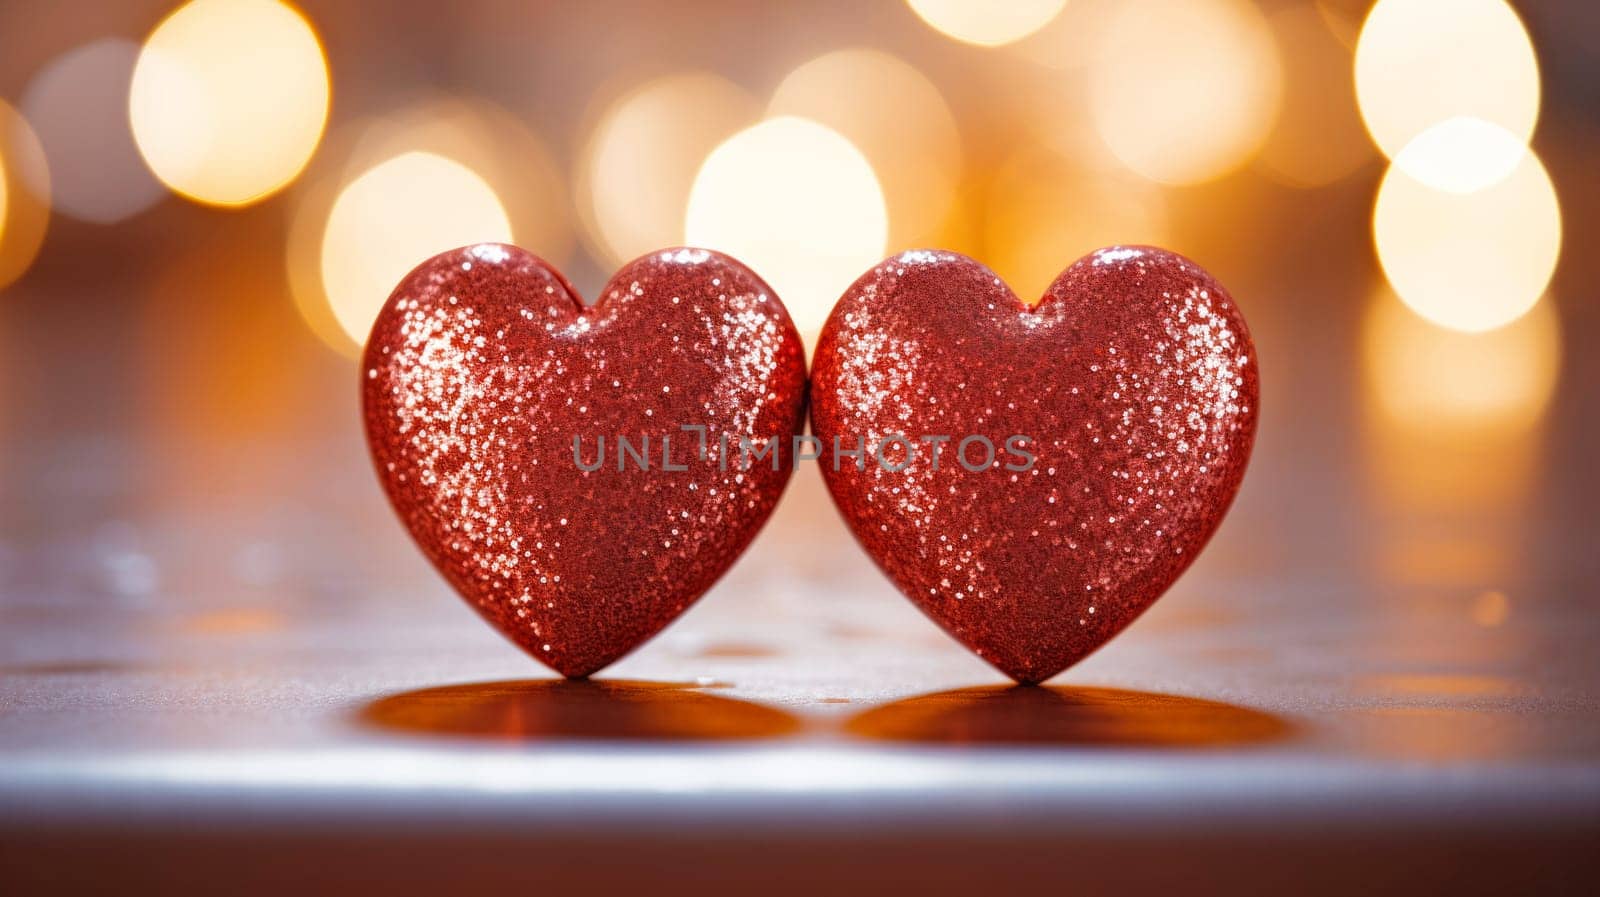 Two red hearts as a symbol of love. Valentine's day background.